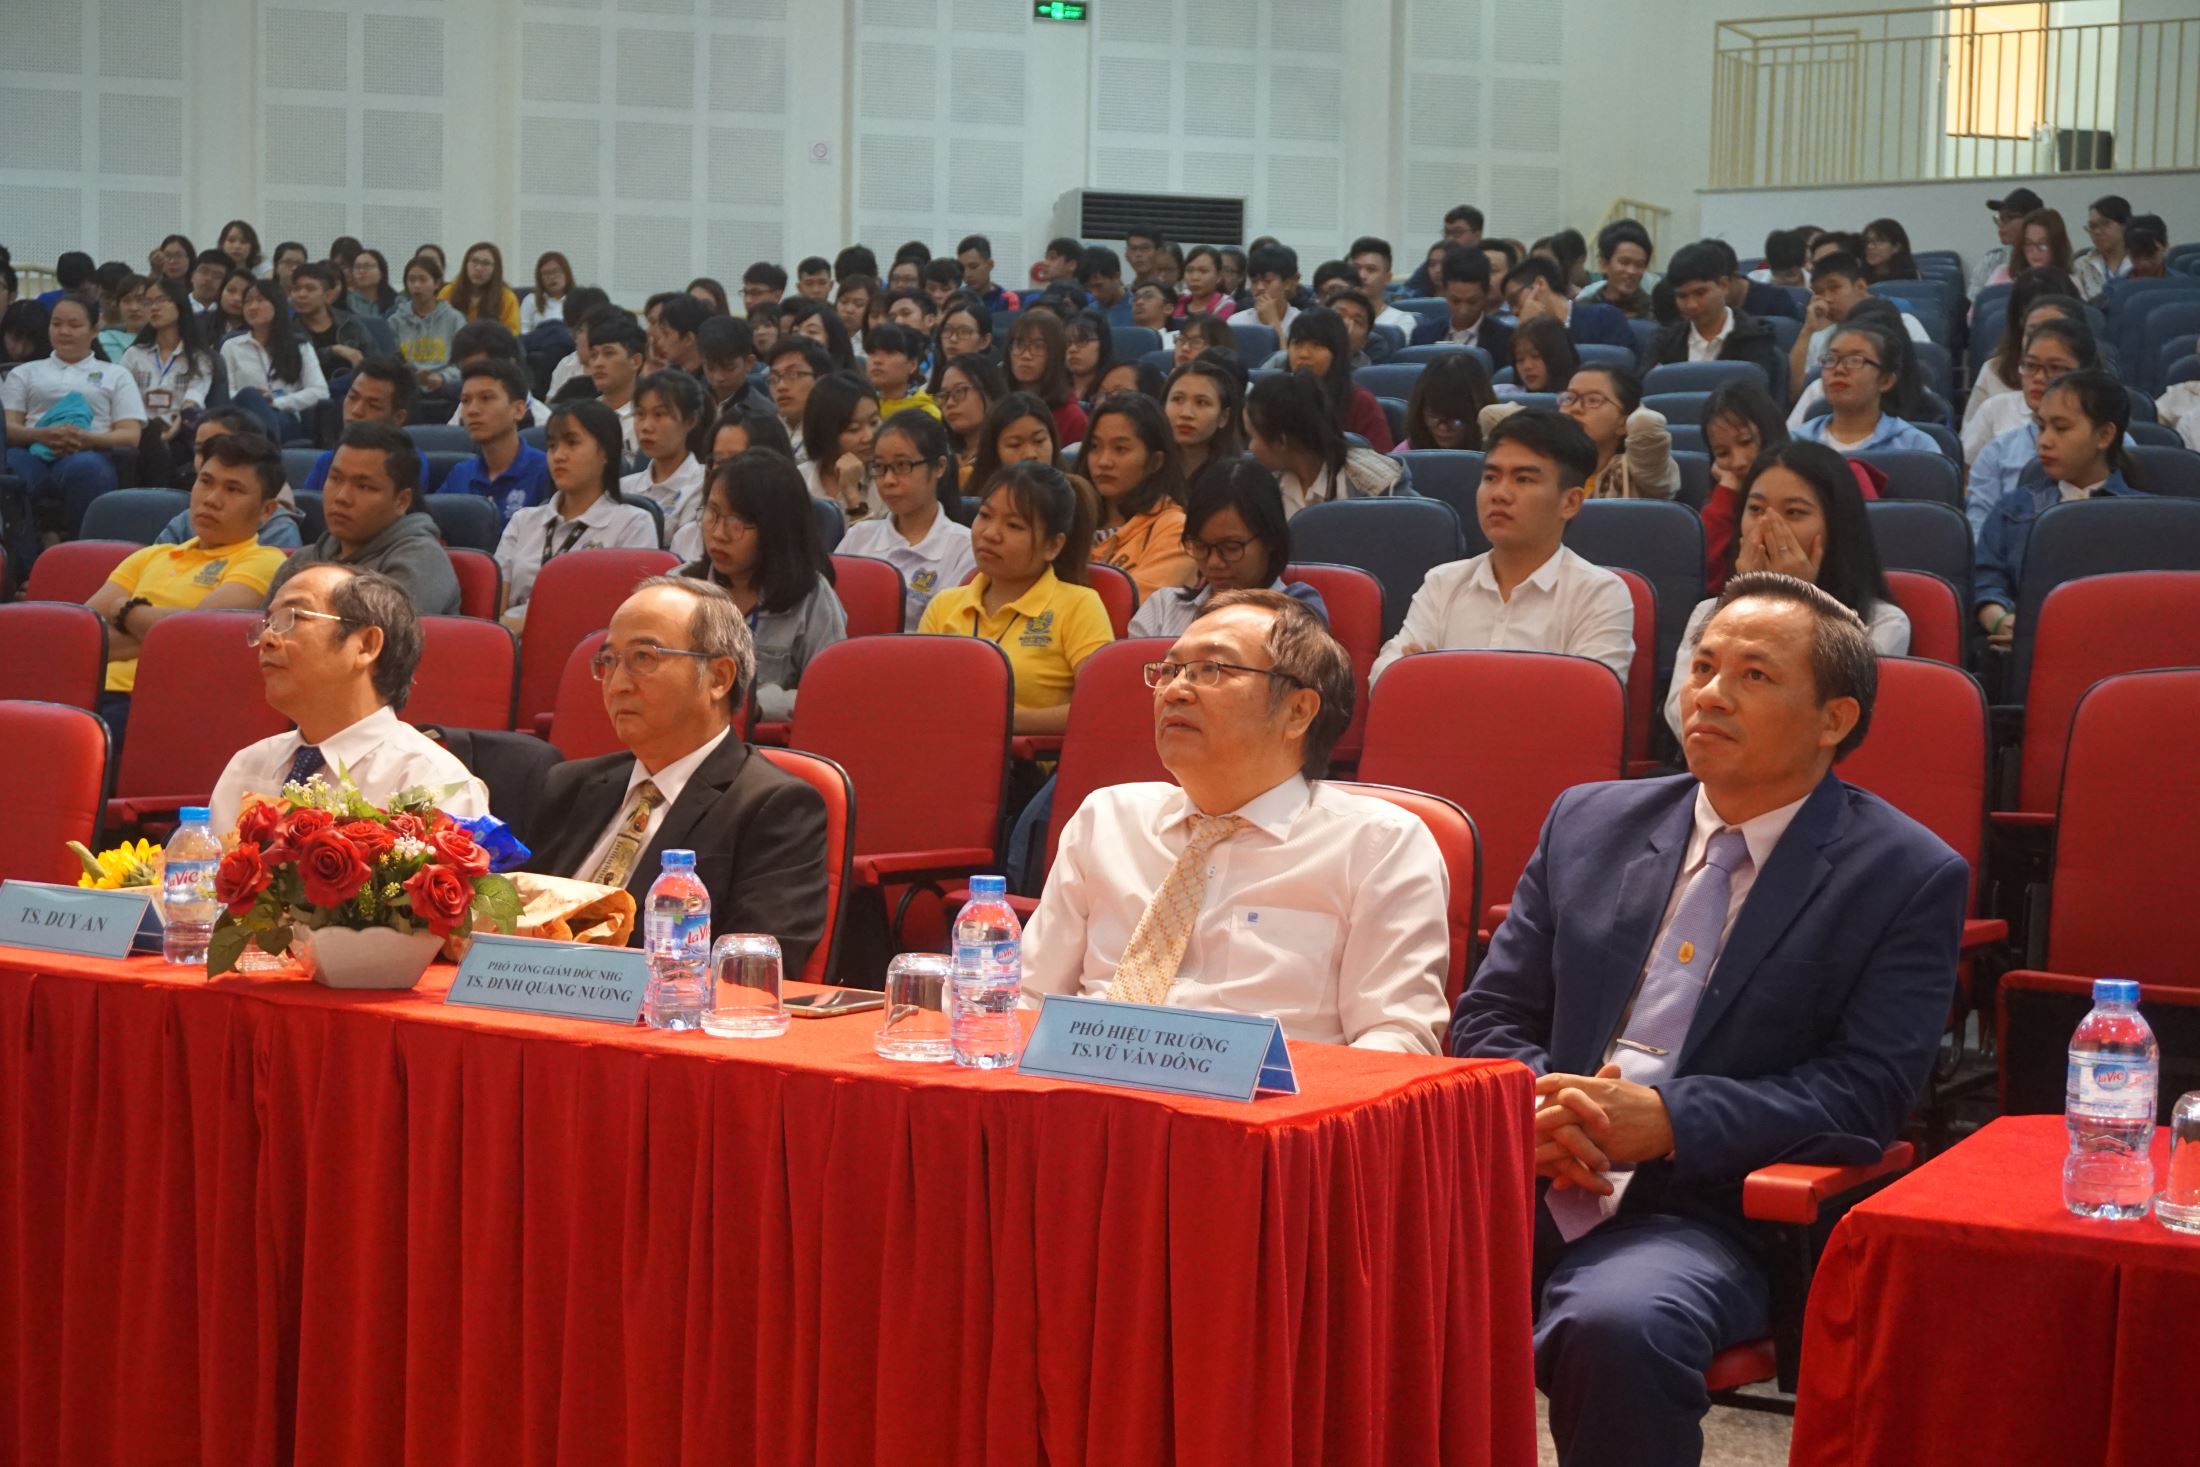 Dr. Dinh Quang Nuong – Deputy CEO of NHG, Dr. Do Manh Cuong – Permanent Member of Education Council, Academic Director of NHG, Dr. Vu Van Dong – Vice Principal of BVU attended the seminar